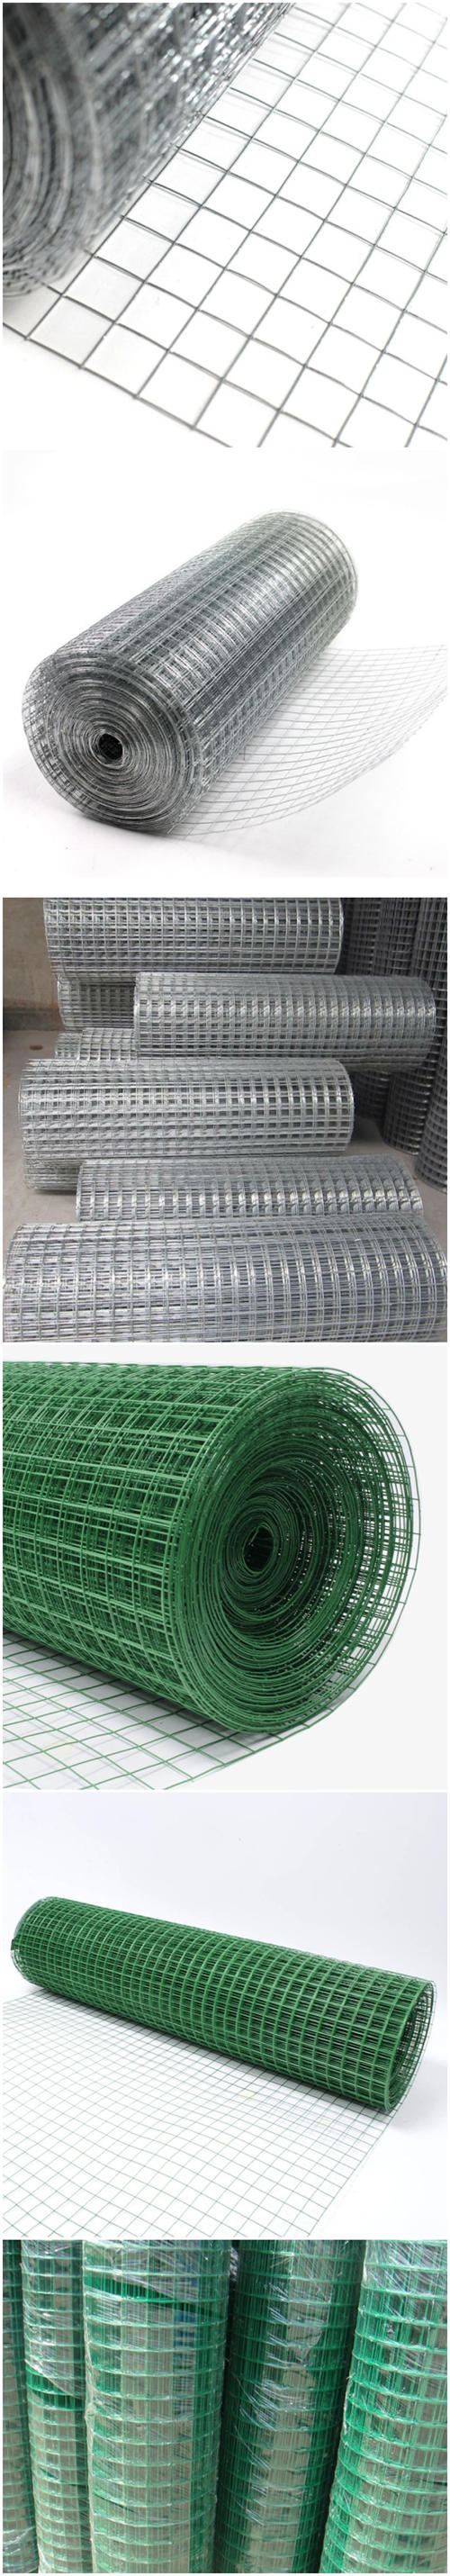 China Wholesaler of PVC Welded Wire Cloth (ZDWWC)